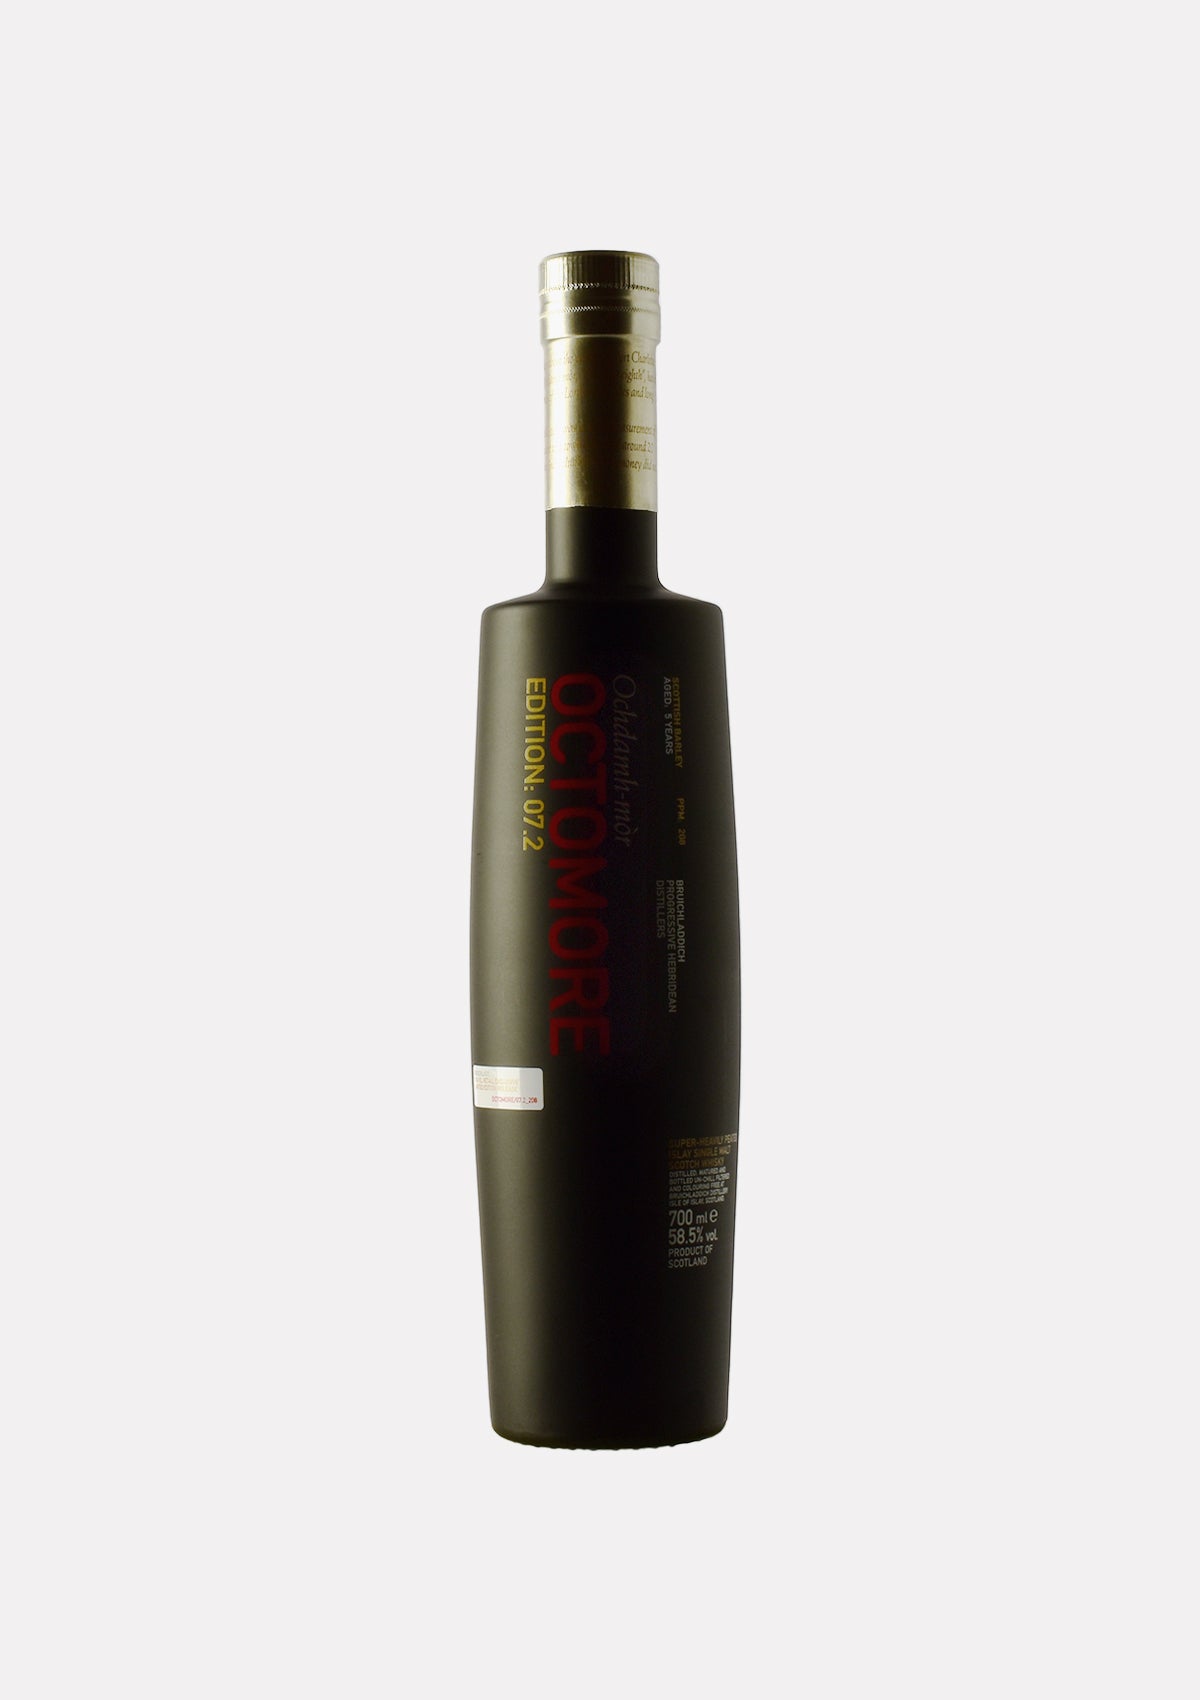 Octomore 07.2 208 ppm